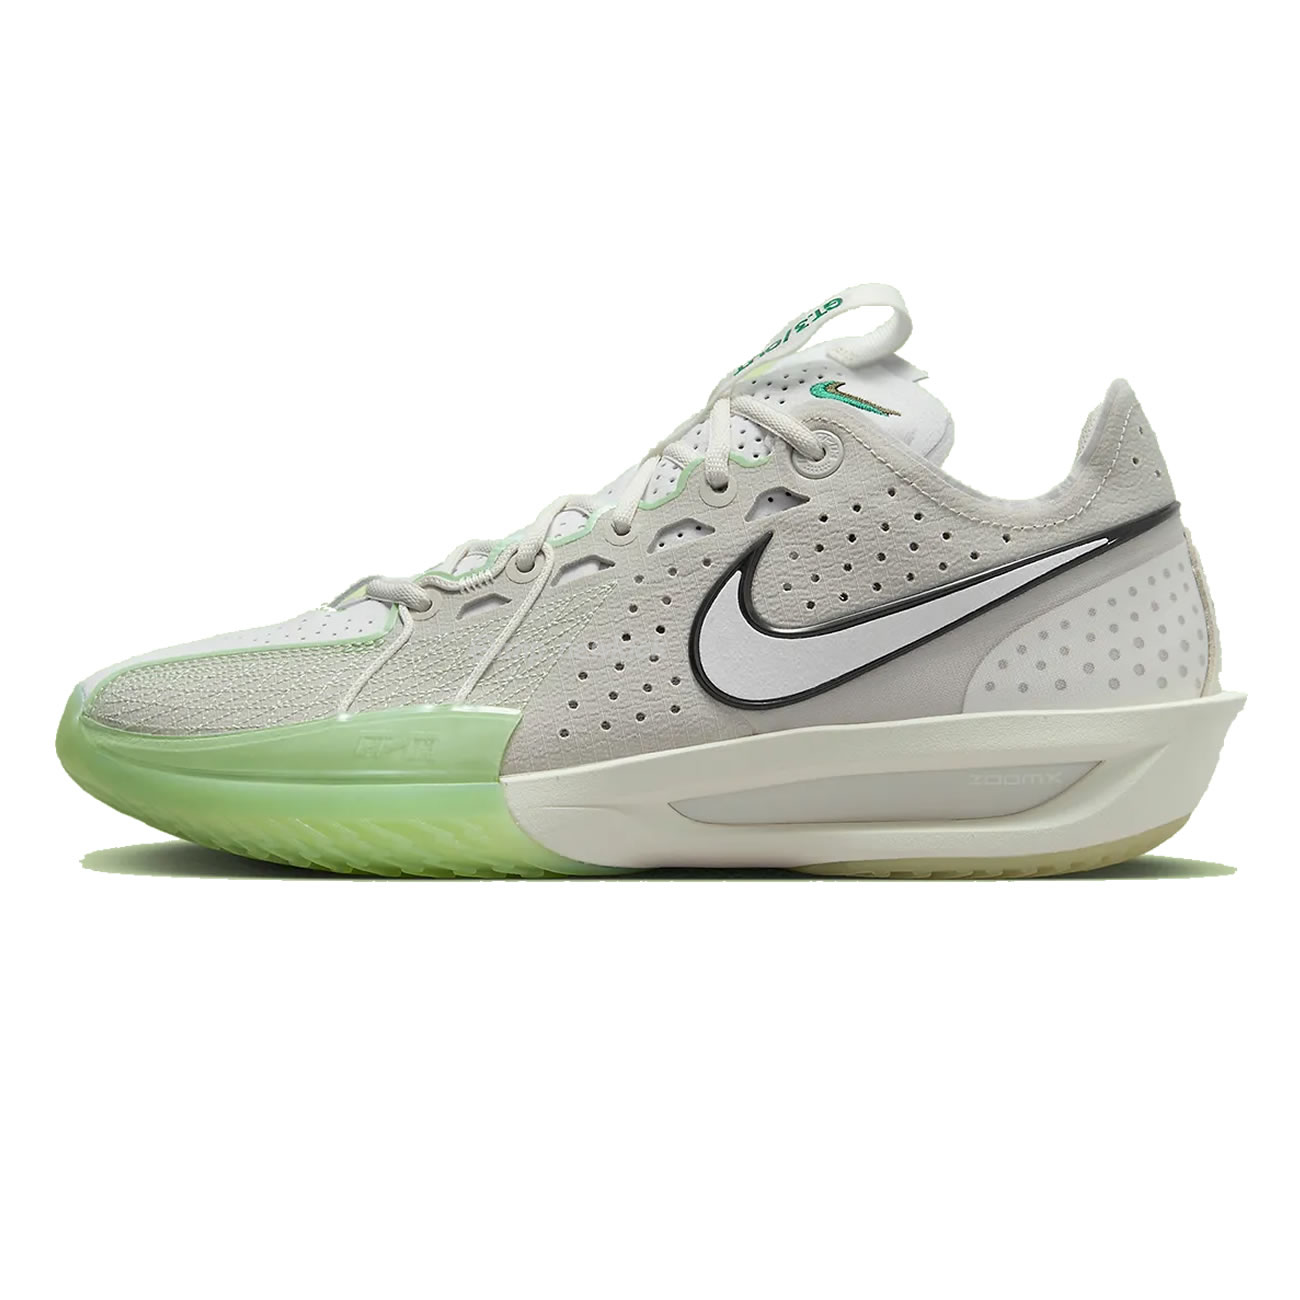 Nike Zoom Gt Cut 3 Be True To Her School White Picante Red Vapor Green University Think Pink (10) - newkick.org